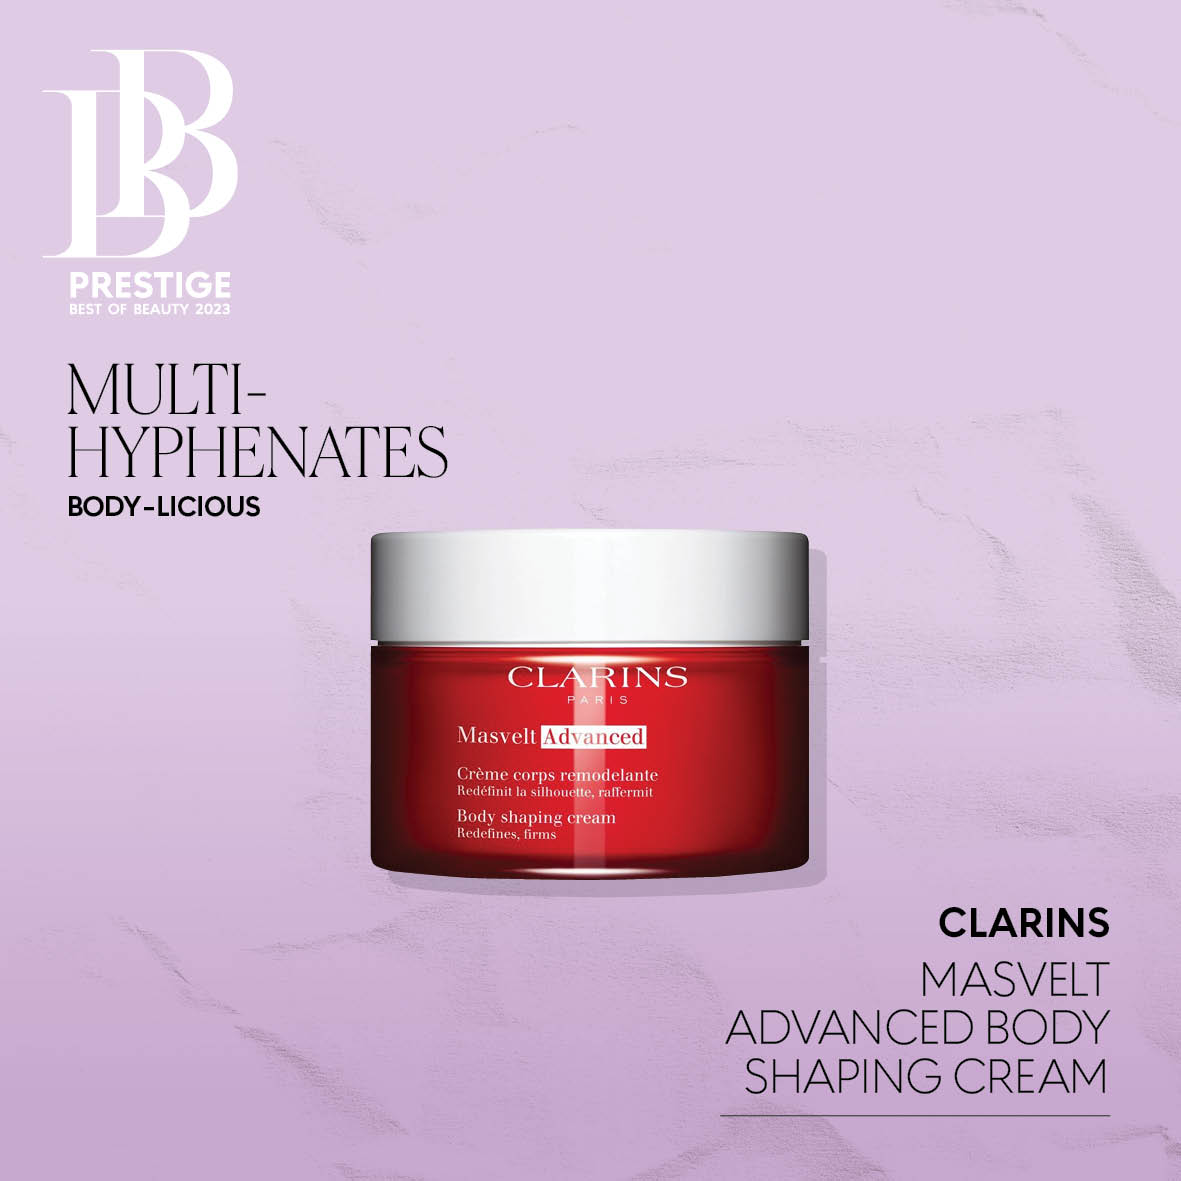 Experience Silhouette Perfection! - Clarins USA